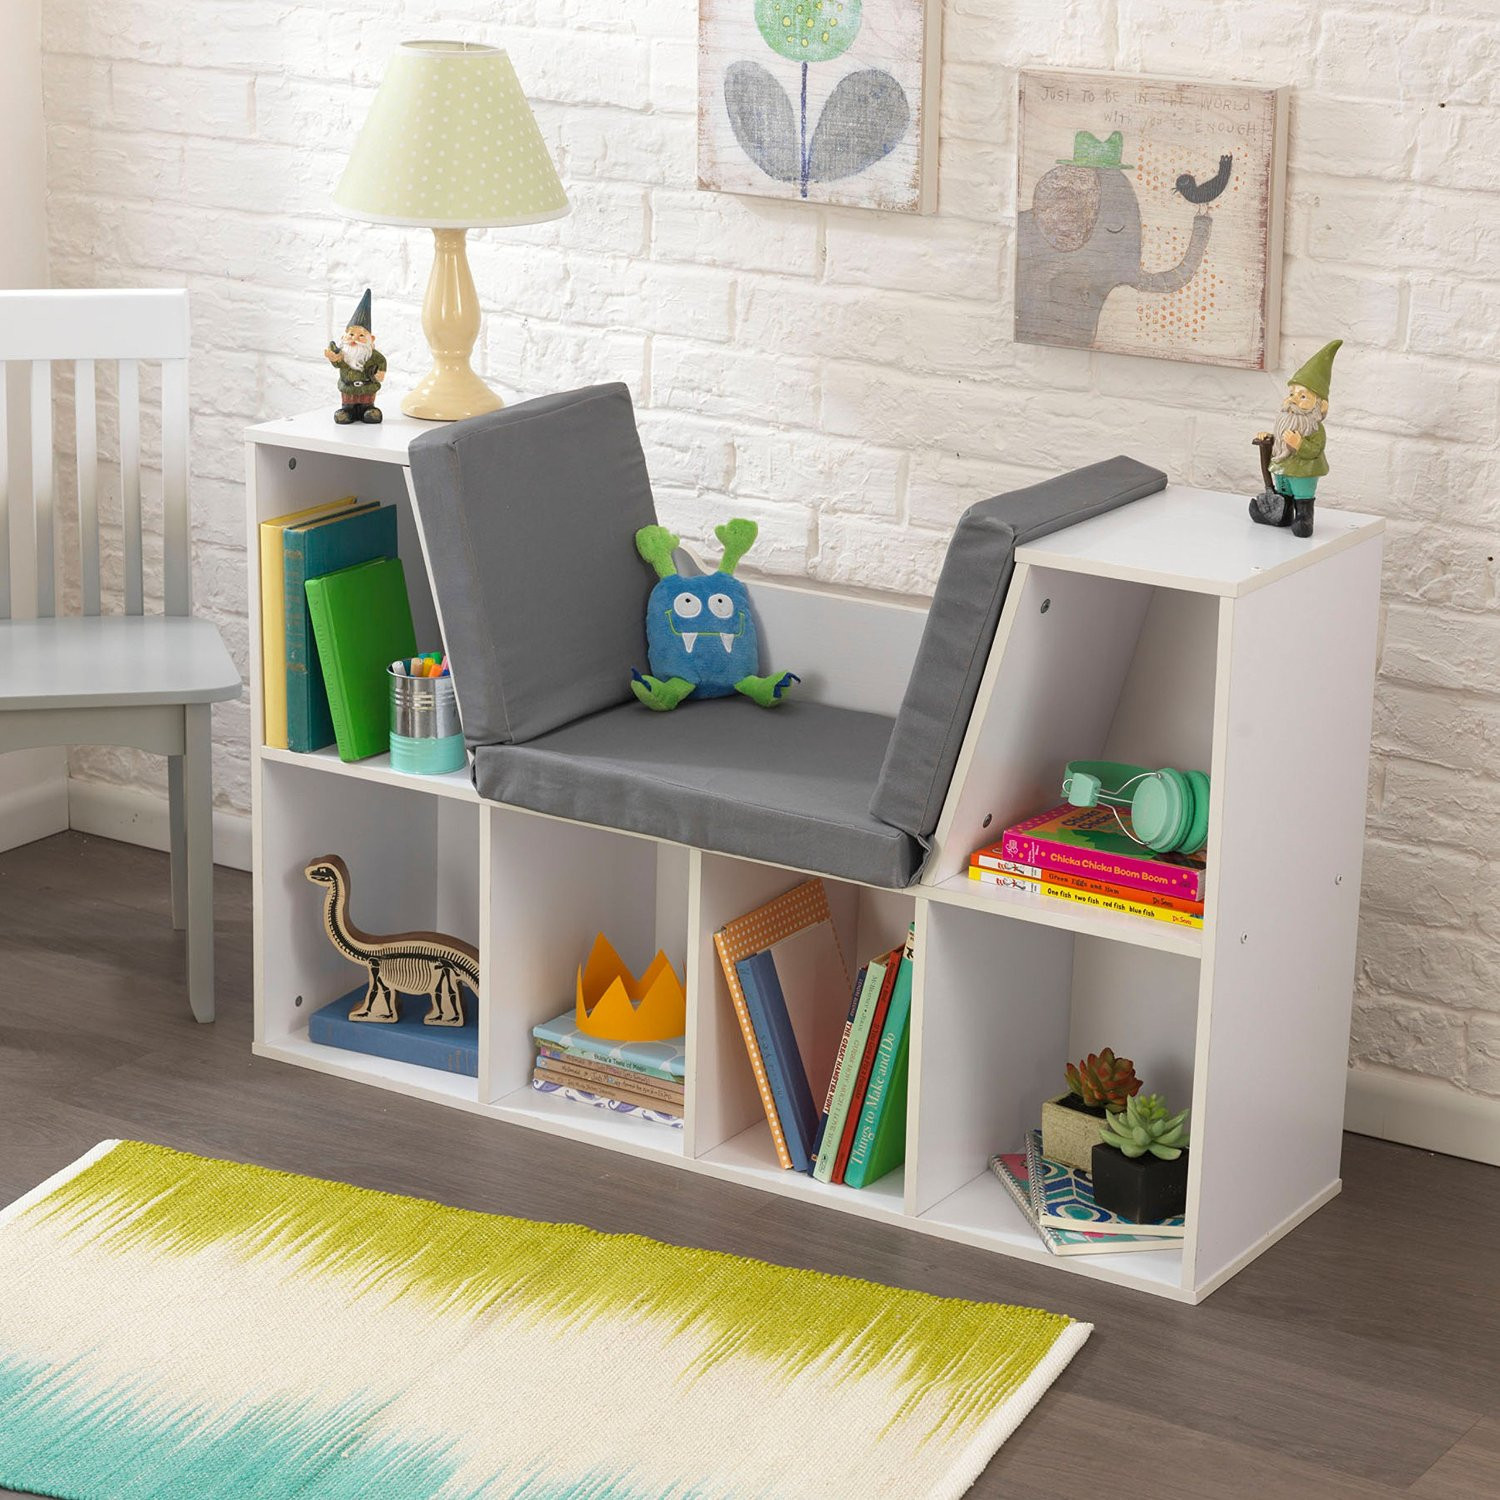 Childrens Bookcases And Storage
 Top 30 collection of White Bookcases and Bookshelfs